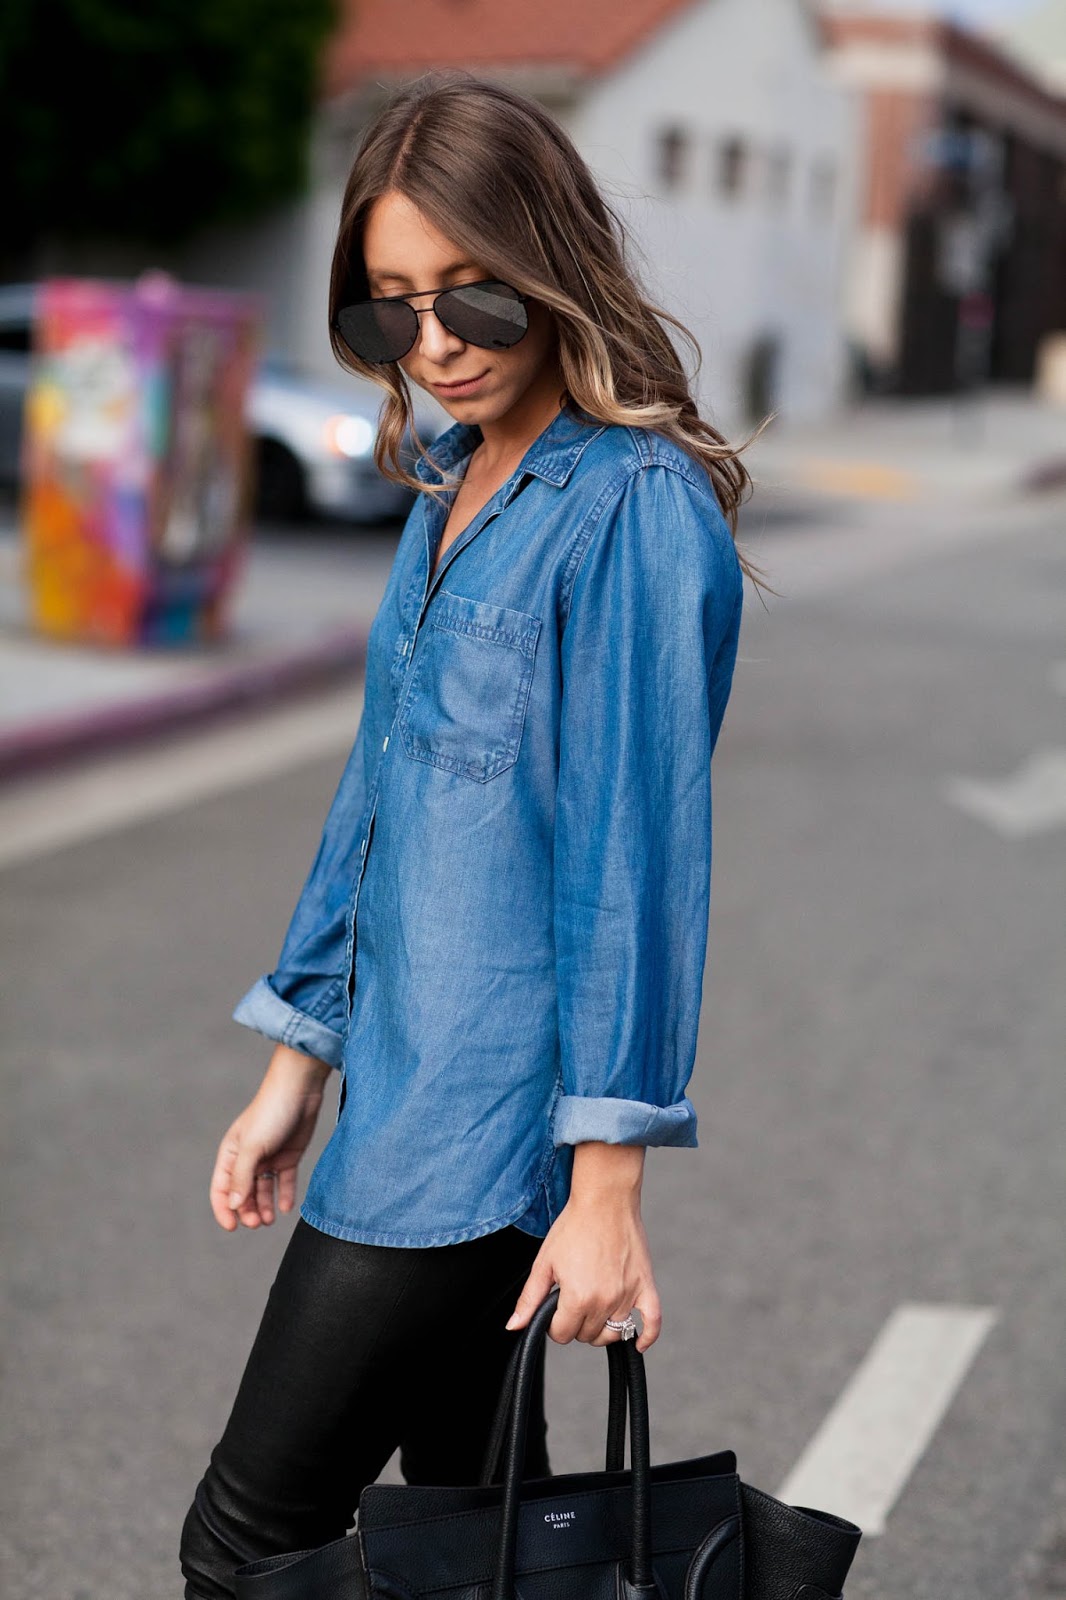 She Went West: The Perfect Denim Shirt